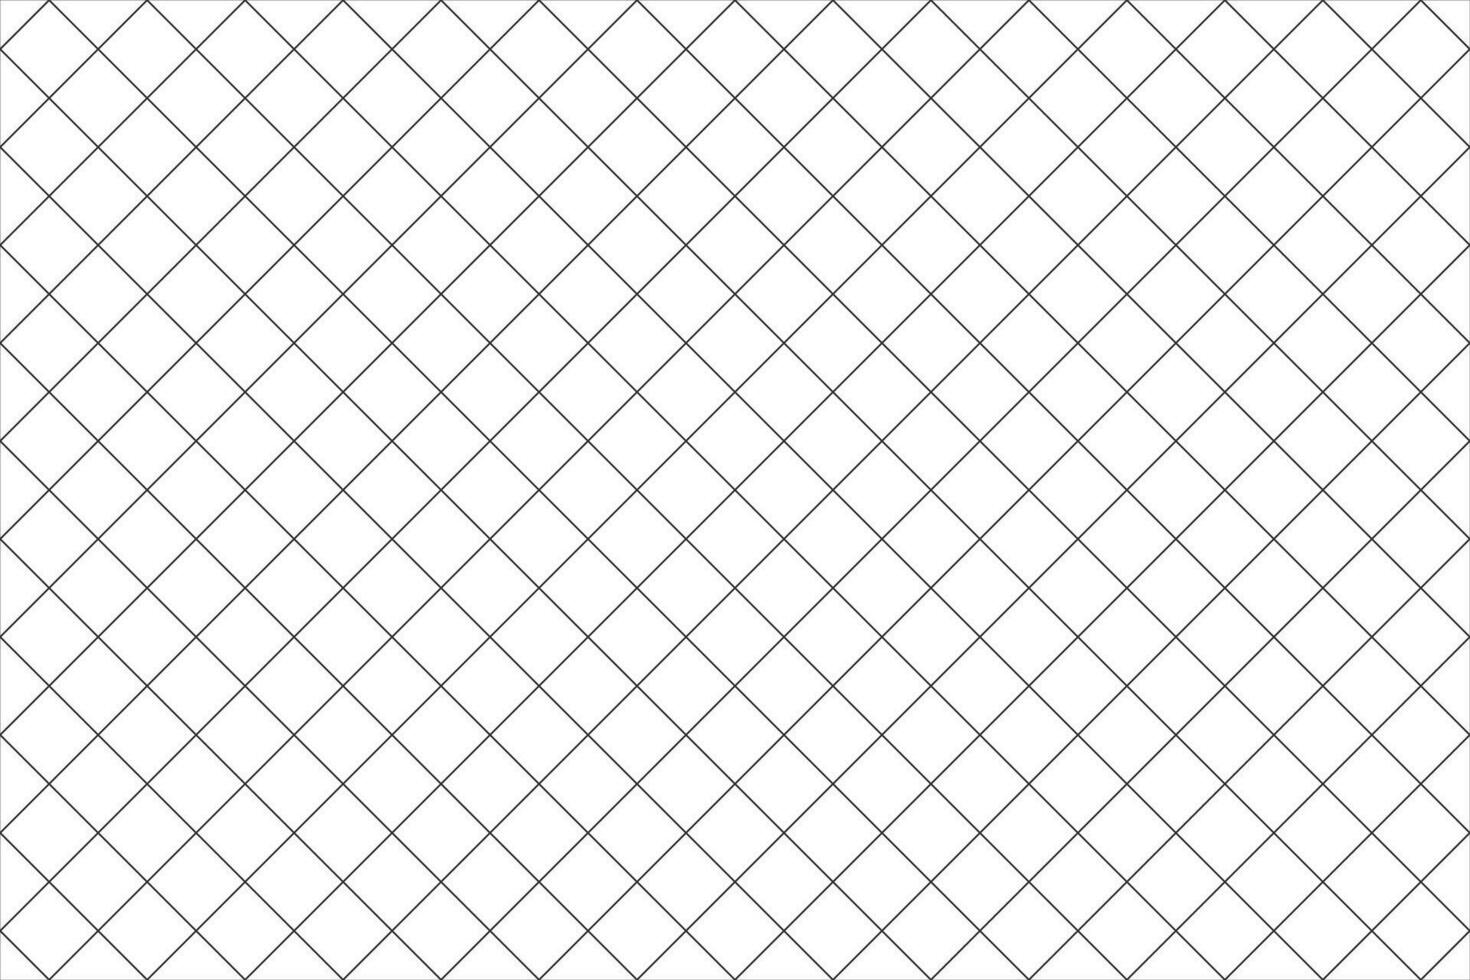 Crosshatch line seamless pattern texture background. Vector illustration isolated on white background